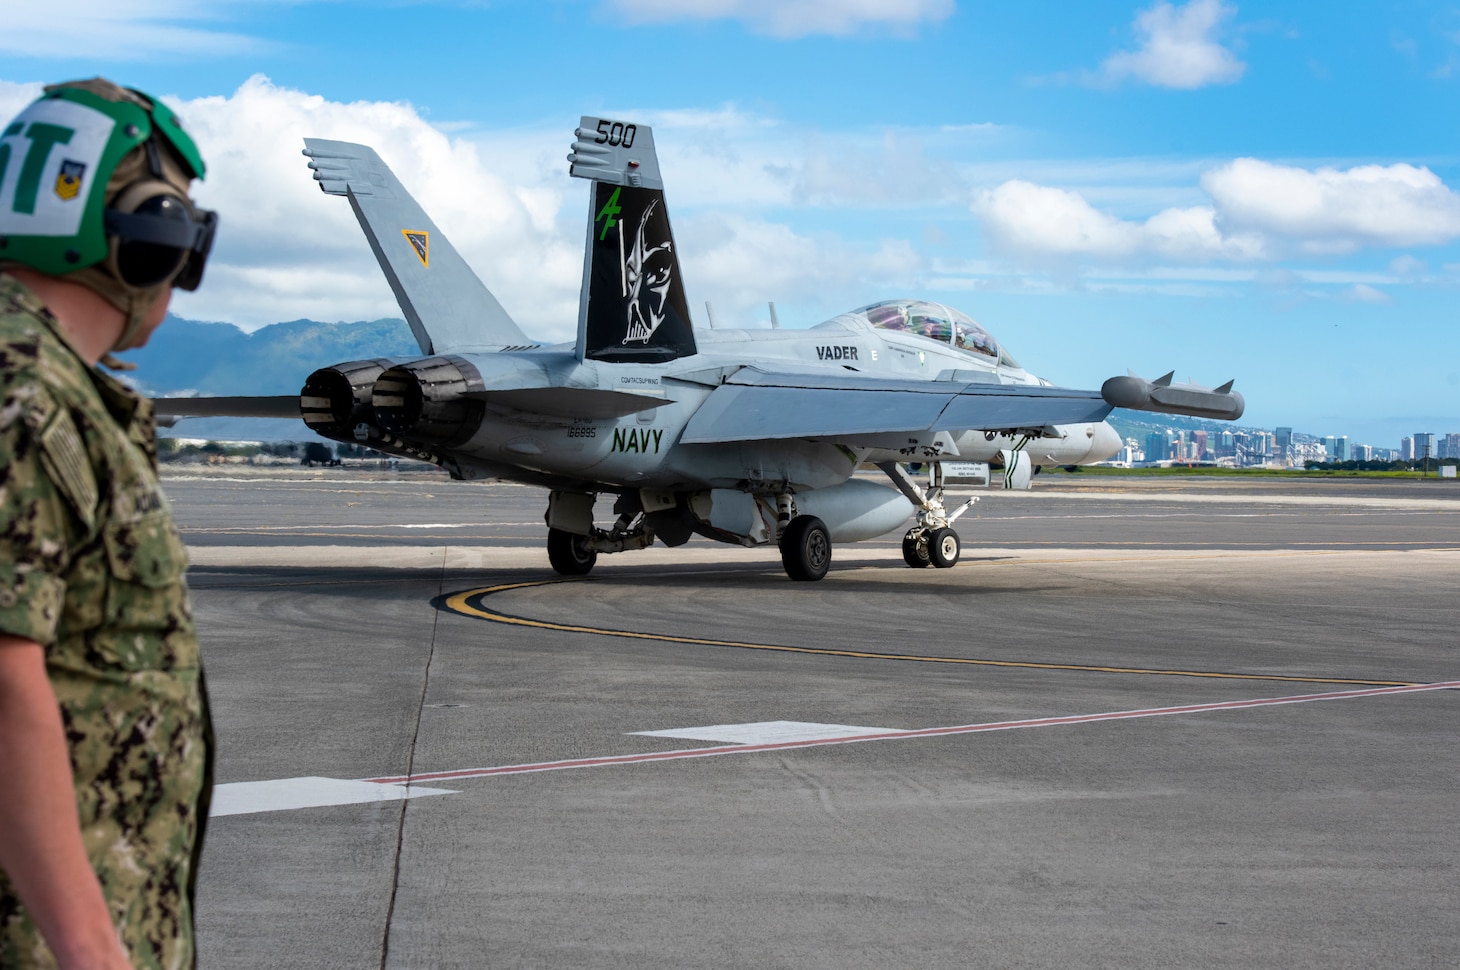 A U.S. Navy EA-18G Growler aircraft assigned to Electronic Attack Squadron 209, Naval Air Station Whidbey Island, Wash., prepares for flight during a joint exercise Jan. 25, 2022, Joint Pearl Harbor-Hickam, Hawaii. The exercise provides participants with a multi-faceted, collaborative venue with supporting infrastructure and personnel. (U.S. Air National Guard photo by Master Sgt. Mysti Bicoy)